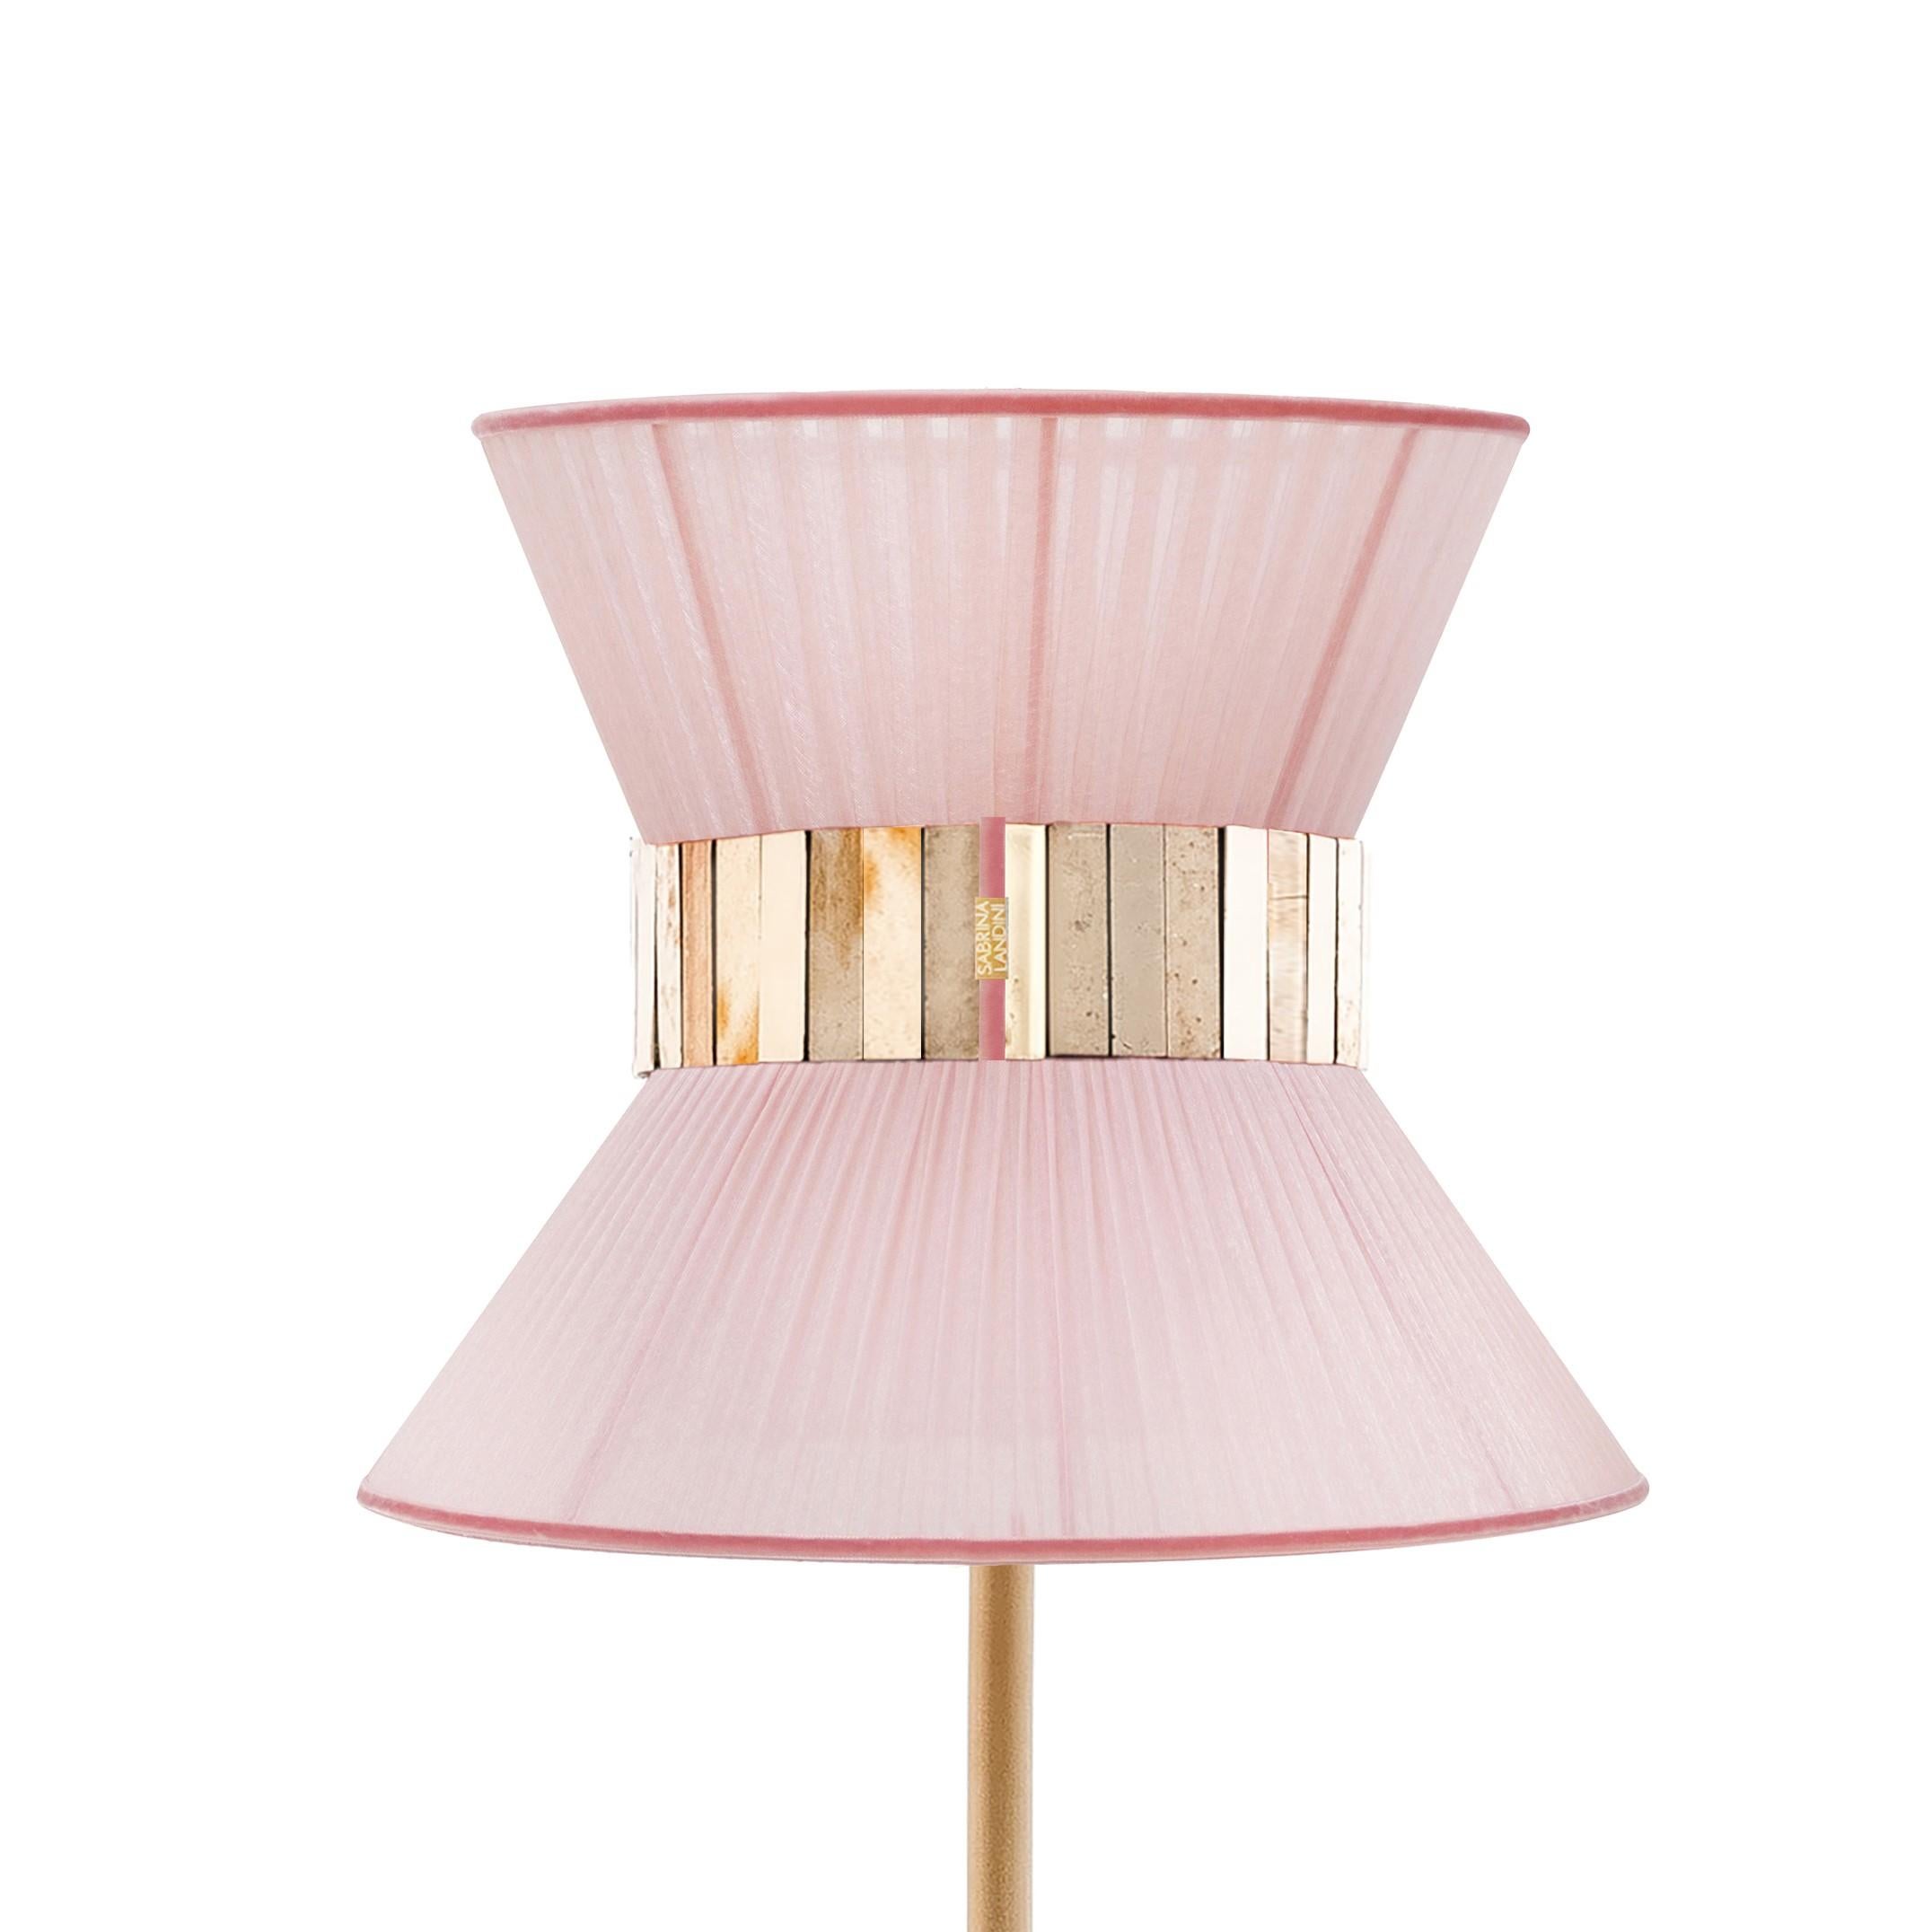 Tiffany, a timeless lamp, inspired by the international movie “Breakfast at Tiffany” and the talented character Audrey Hepburn, is a contemporary lamp, entirely made in Tuscany, Italy and 100% of Italian origin.

Thanks to the Italian manufacturing